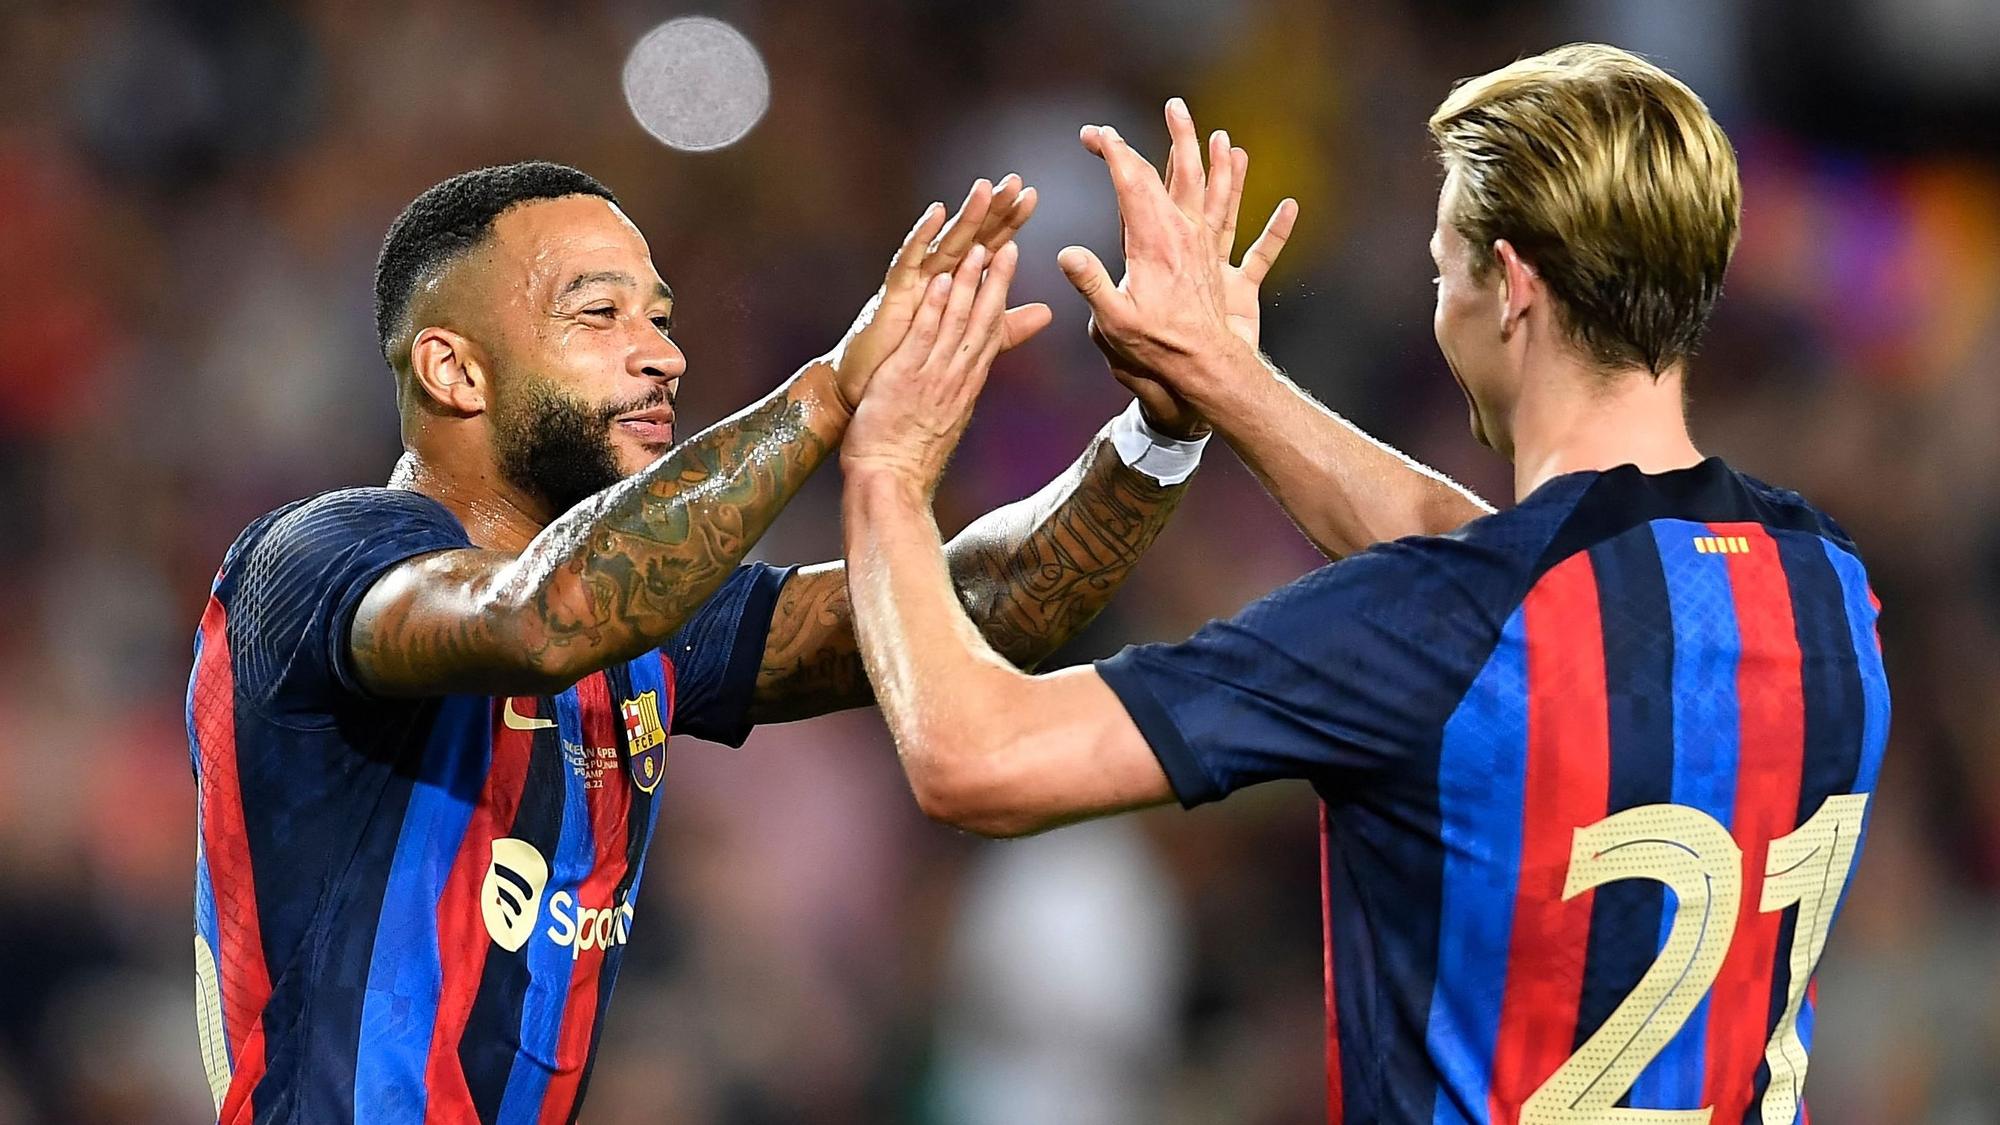 Barcelona's Dutch midfielder Frenkie De Jong (R) celebrates with Barcelona's Dutch forward Memphis Depay after scoring a goal during the 57th Joan Gamper Trophy friendly football match between FC Barcelona and Club Universidad Nacional Pumas at the Camp Nou stadium in Barcelona on August 7, 2022. (Photo by Pau BARRENA / AFP)